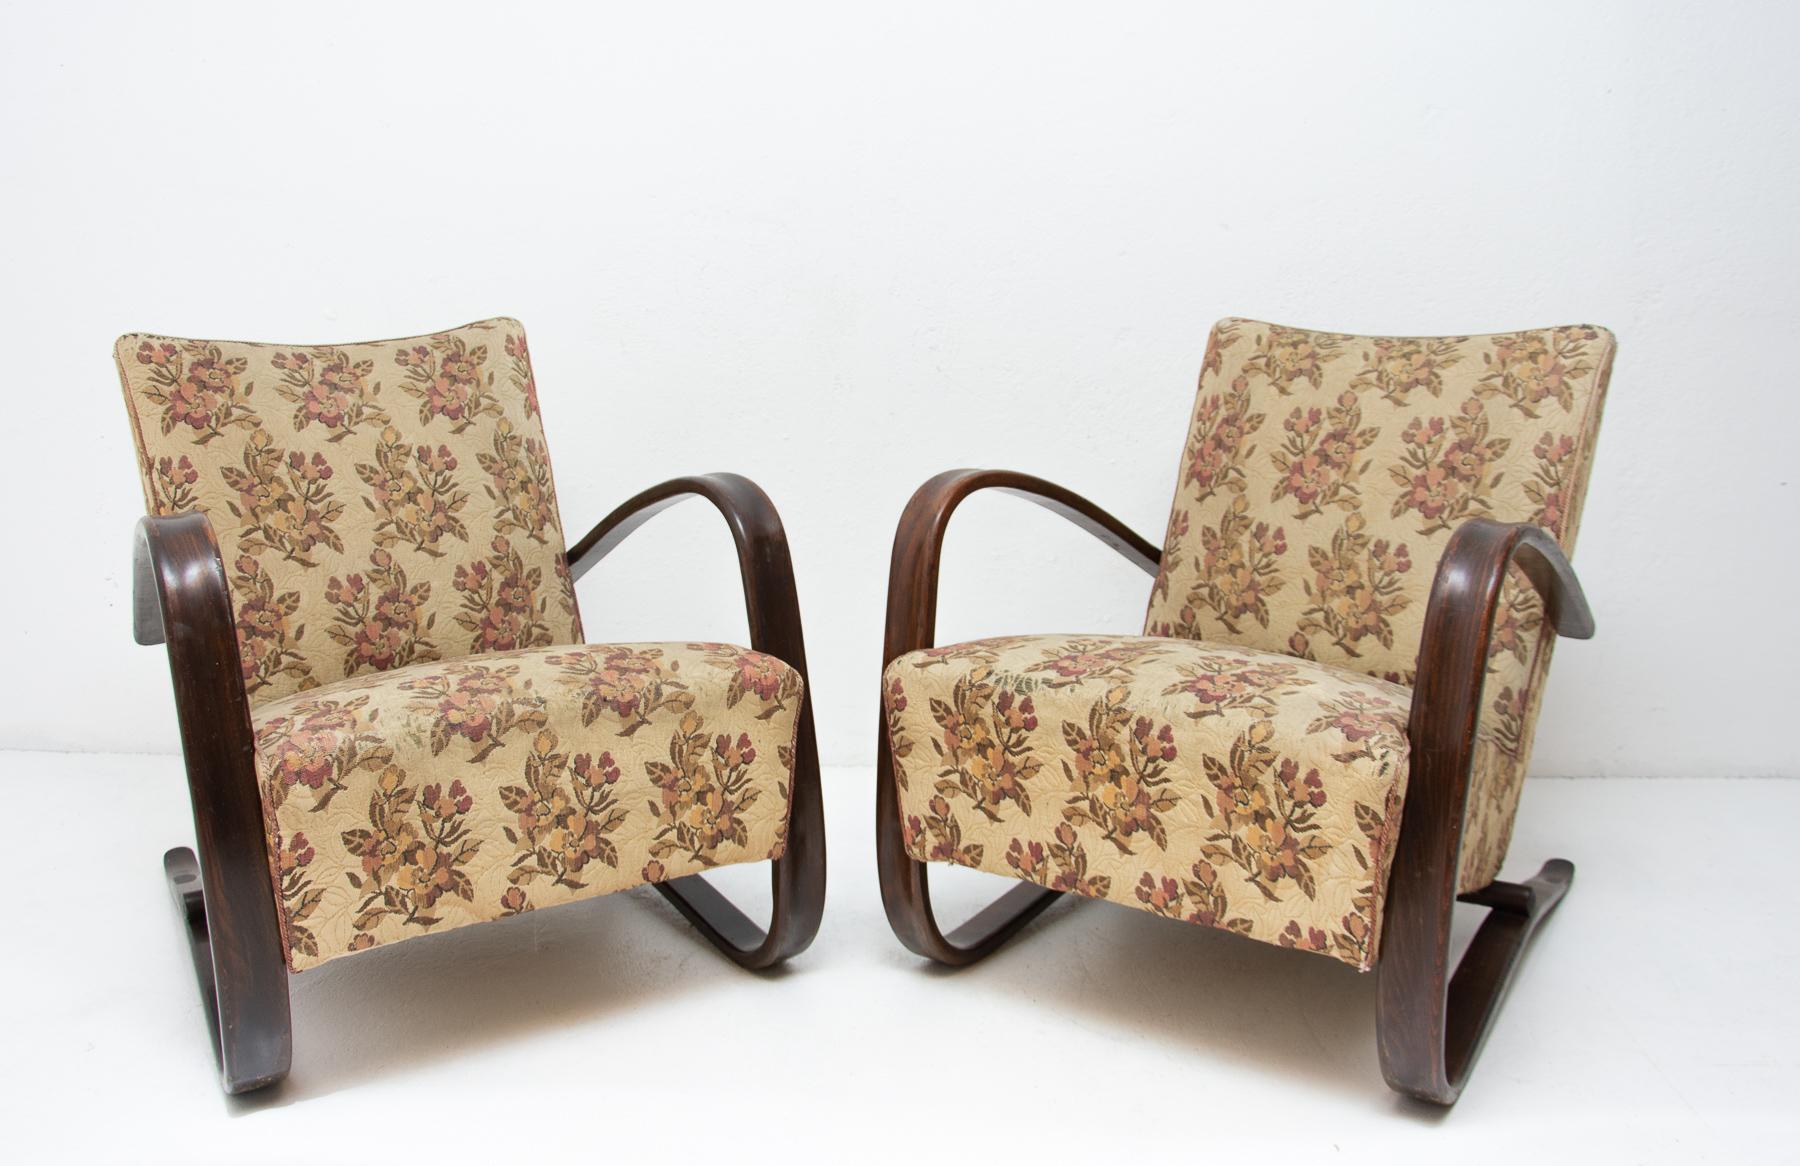 Upholstery Pair of H-269 Armchairs Designed by Jindrich Halabala, 1930s